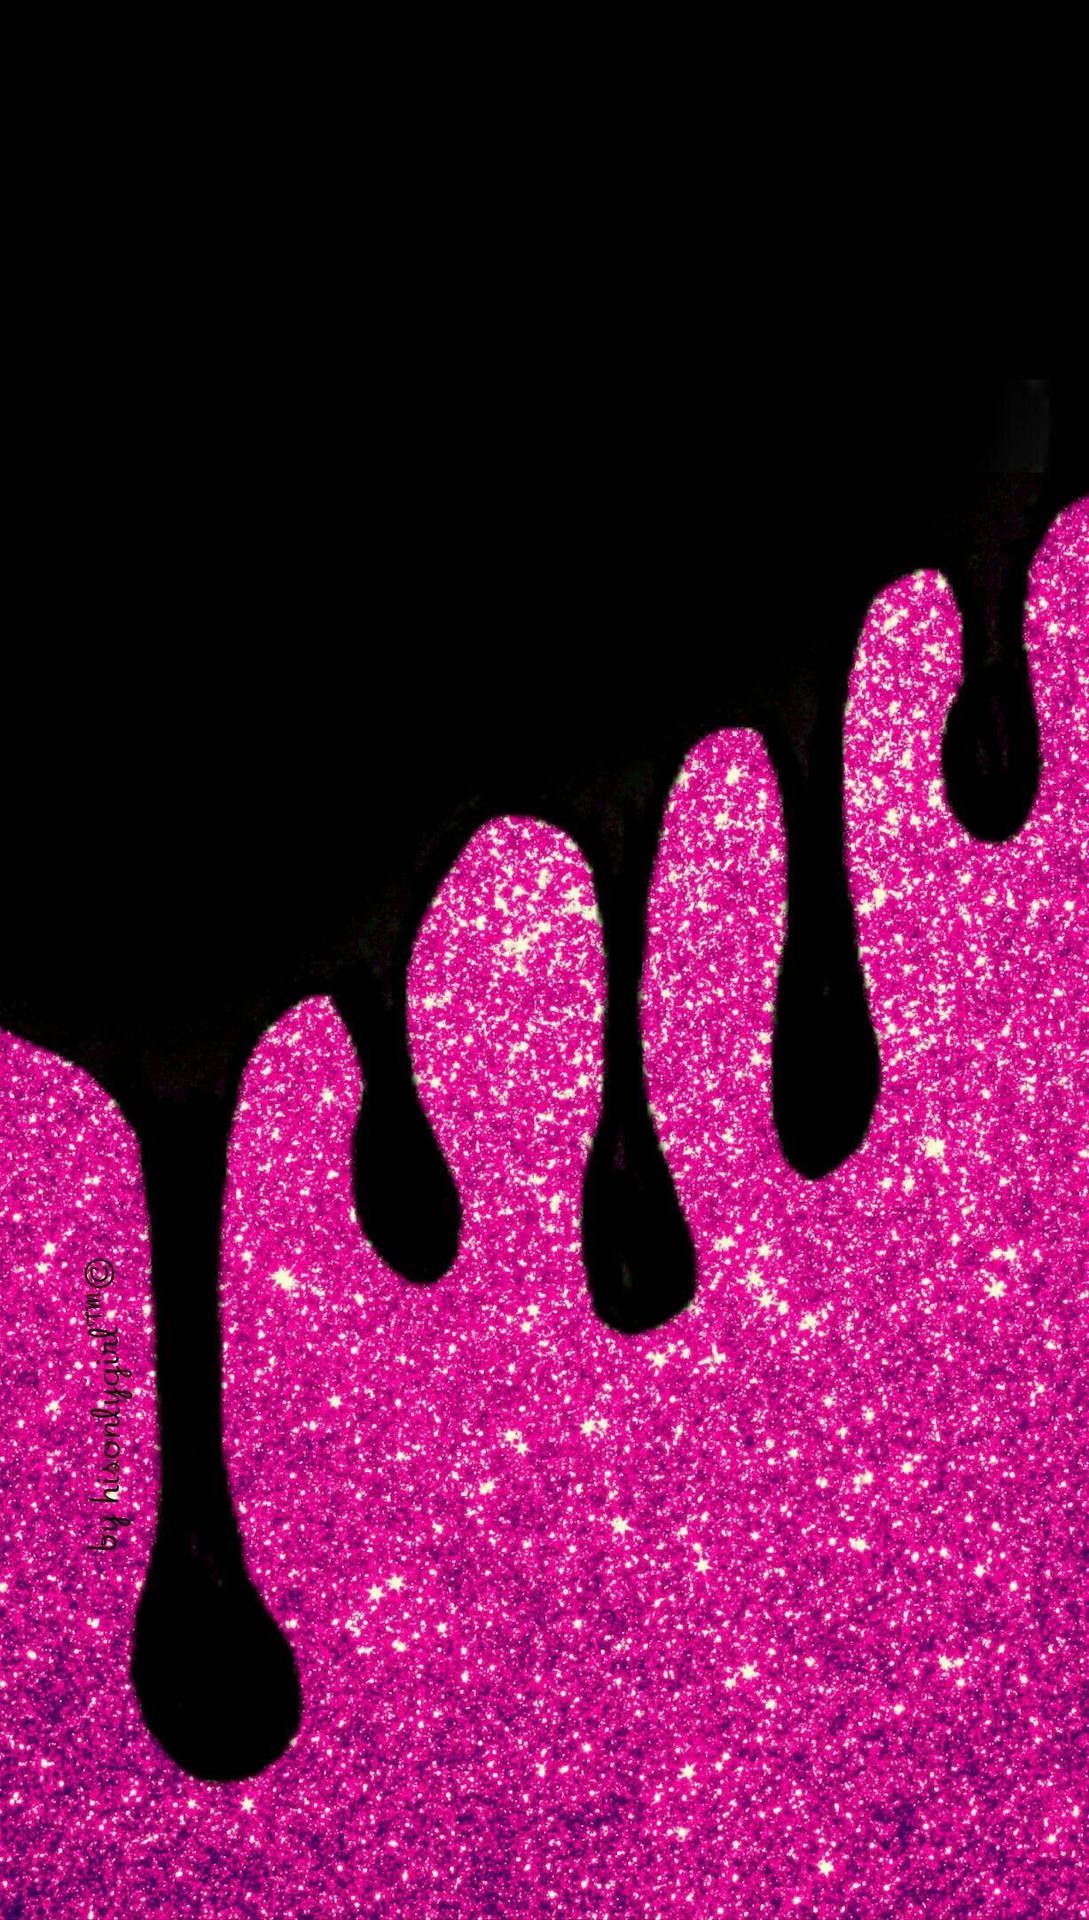 A pink and black poster with dripping liquid - Glitter